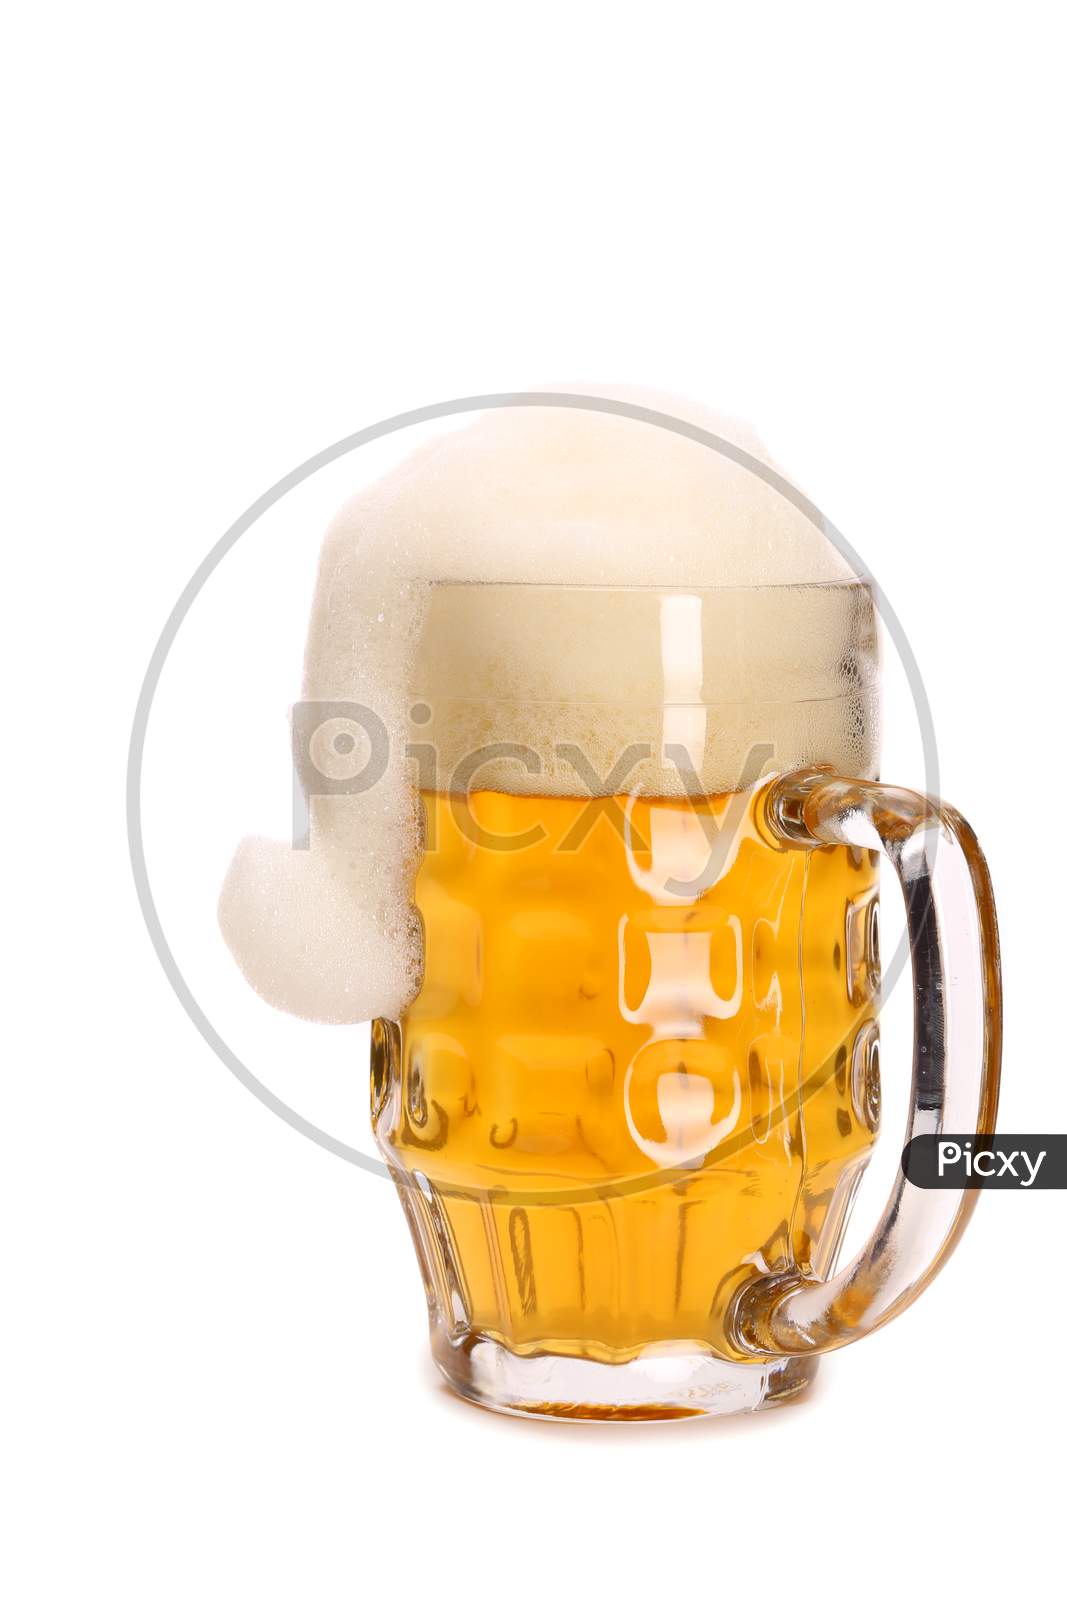 Mug Woth Beer And Santa'S Hat. Isolated On A White Background.